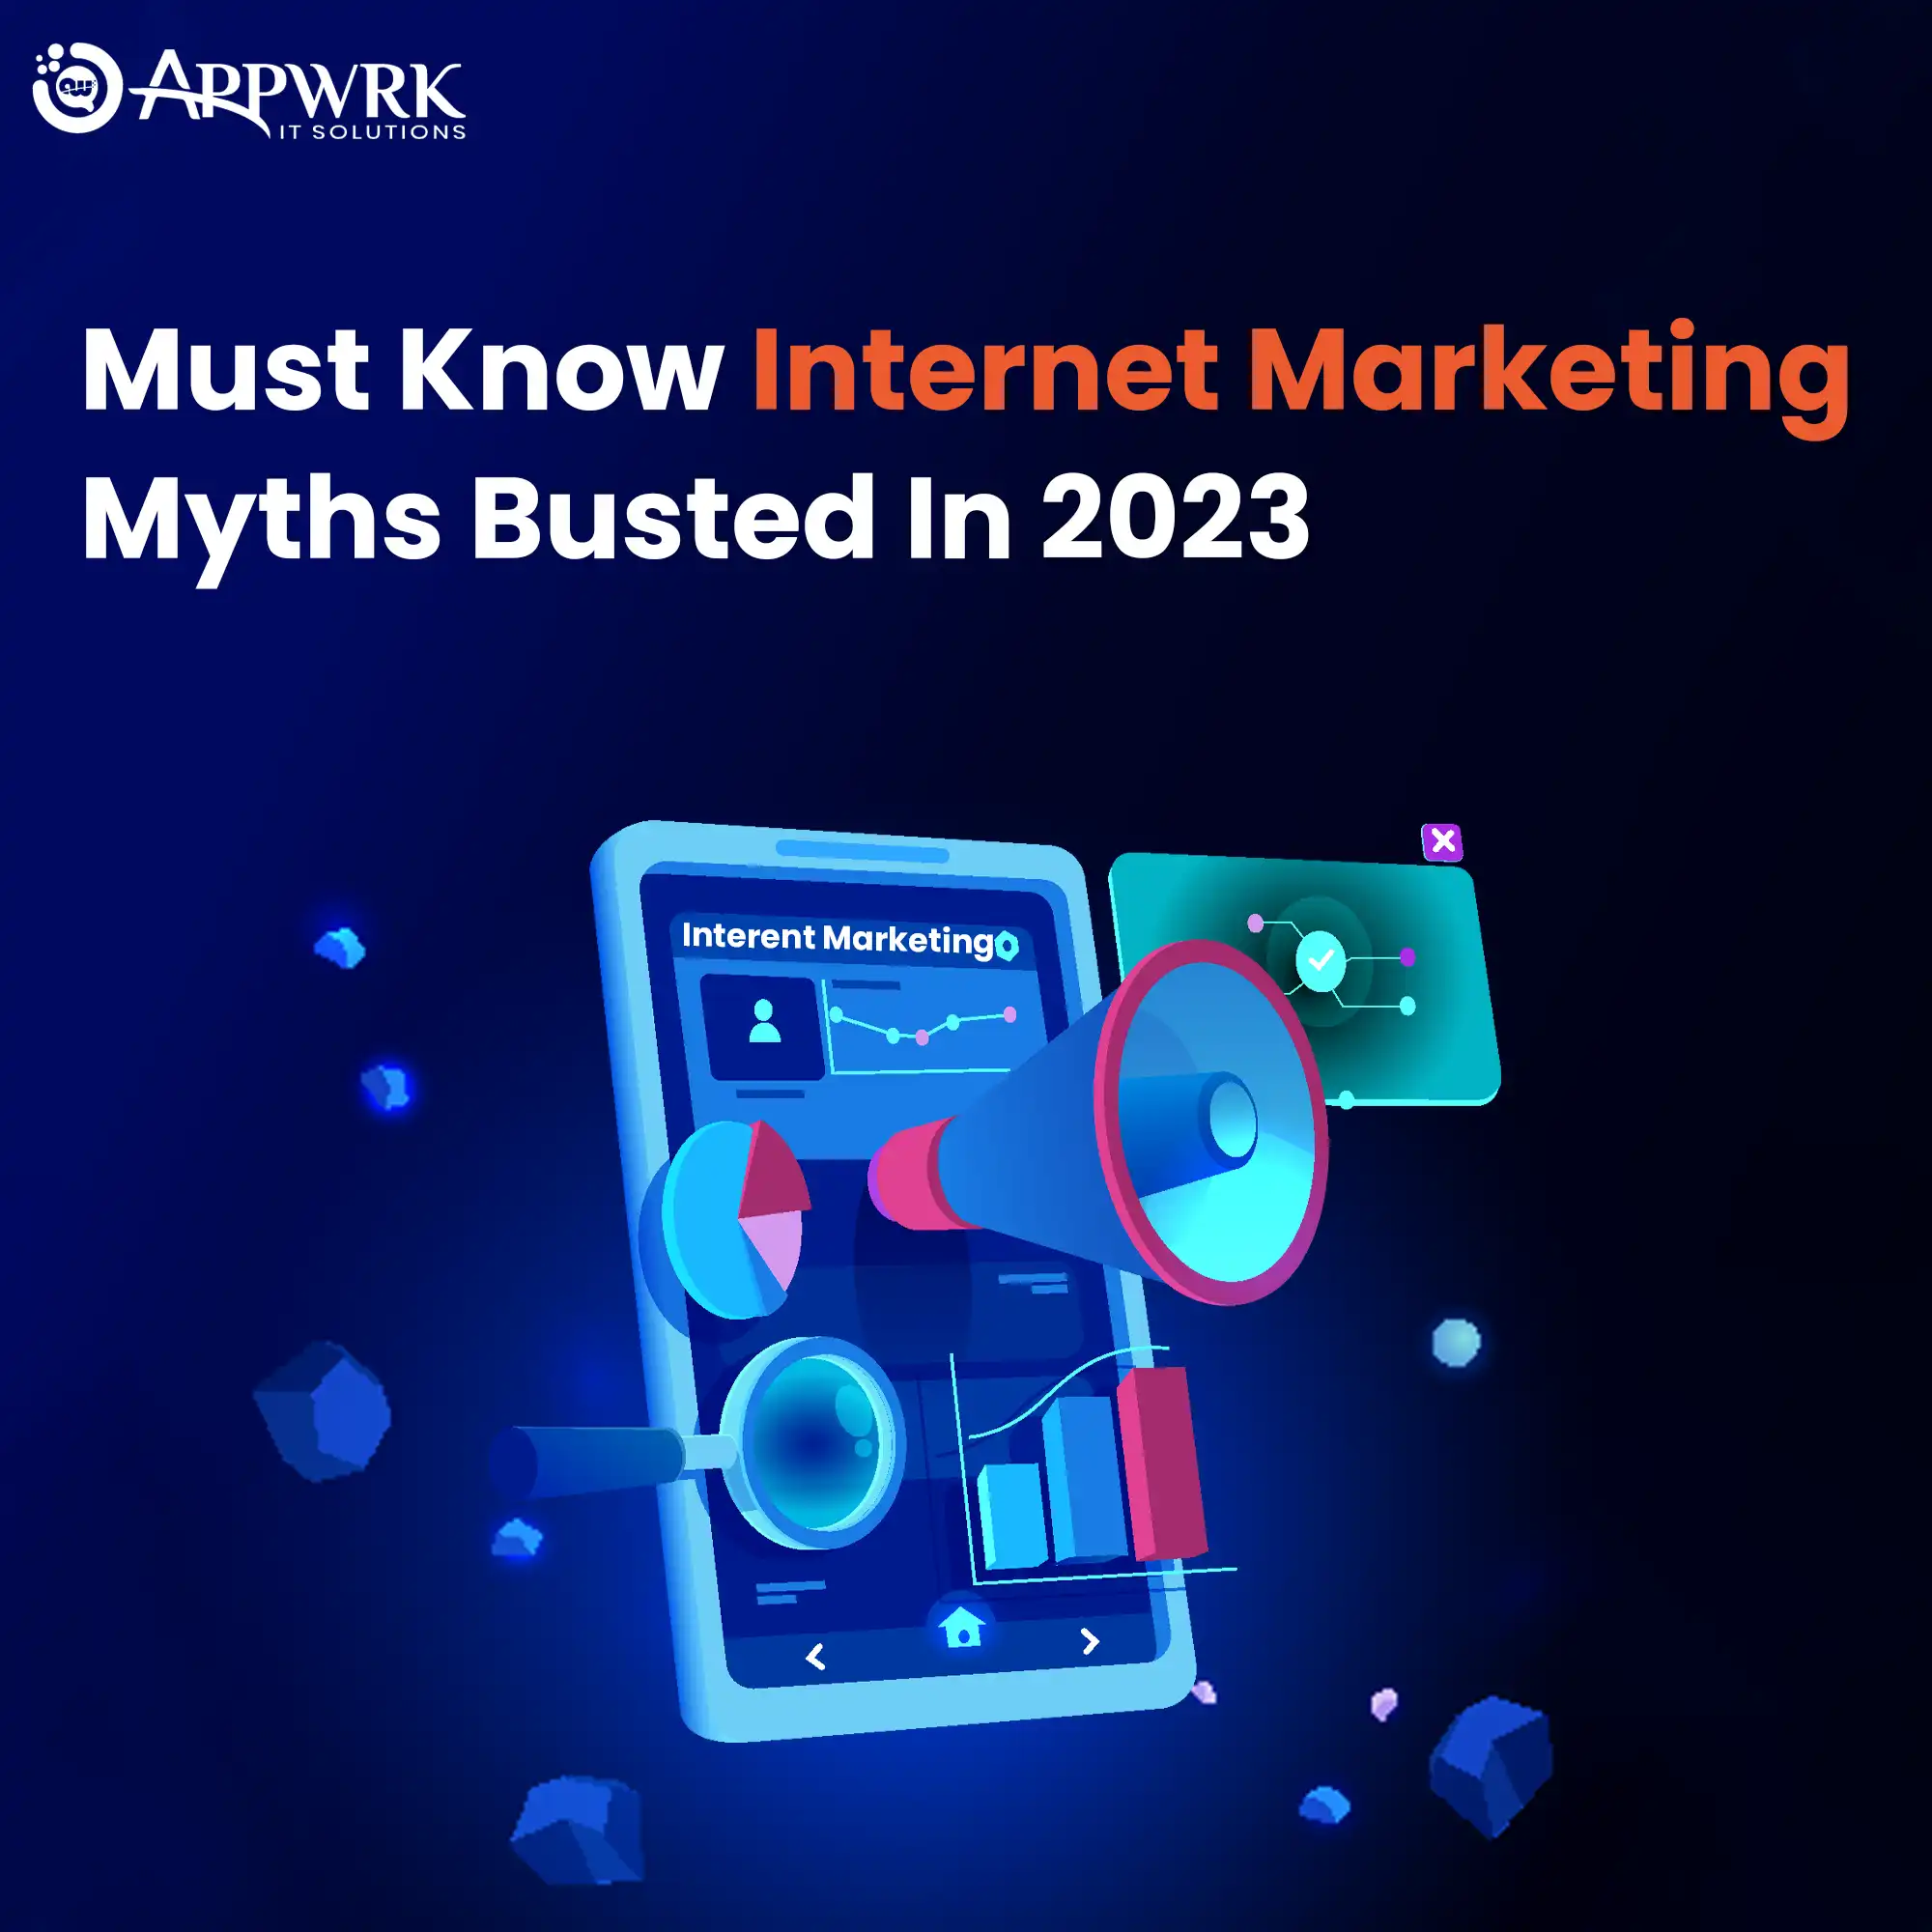 Must Know Internet Marketing Myths Busted in 2023